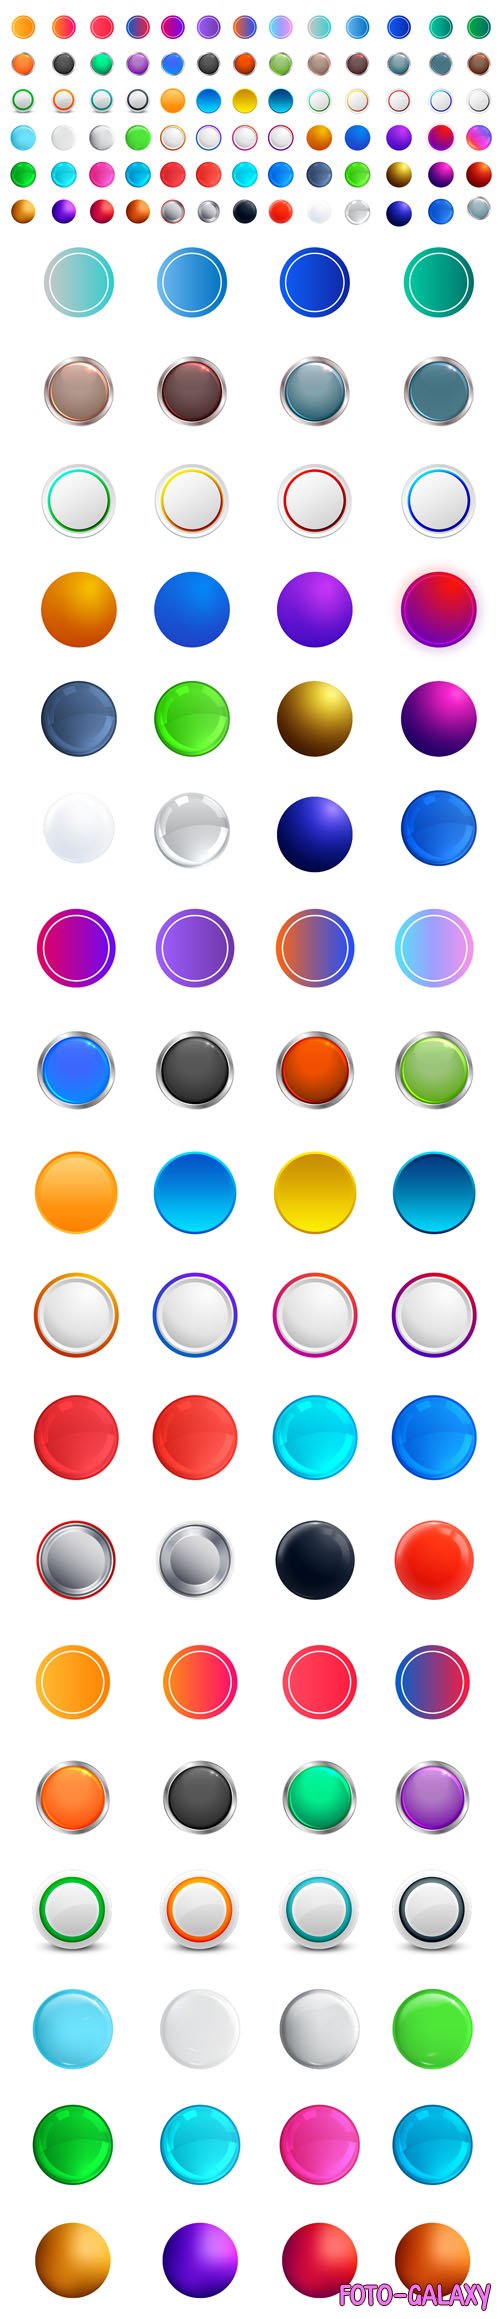 80+ Icons - Buttons Vector Templates